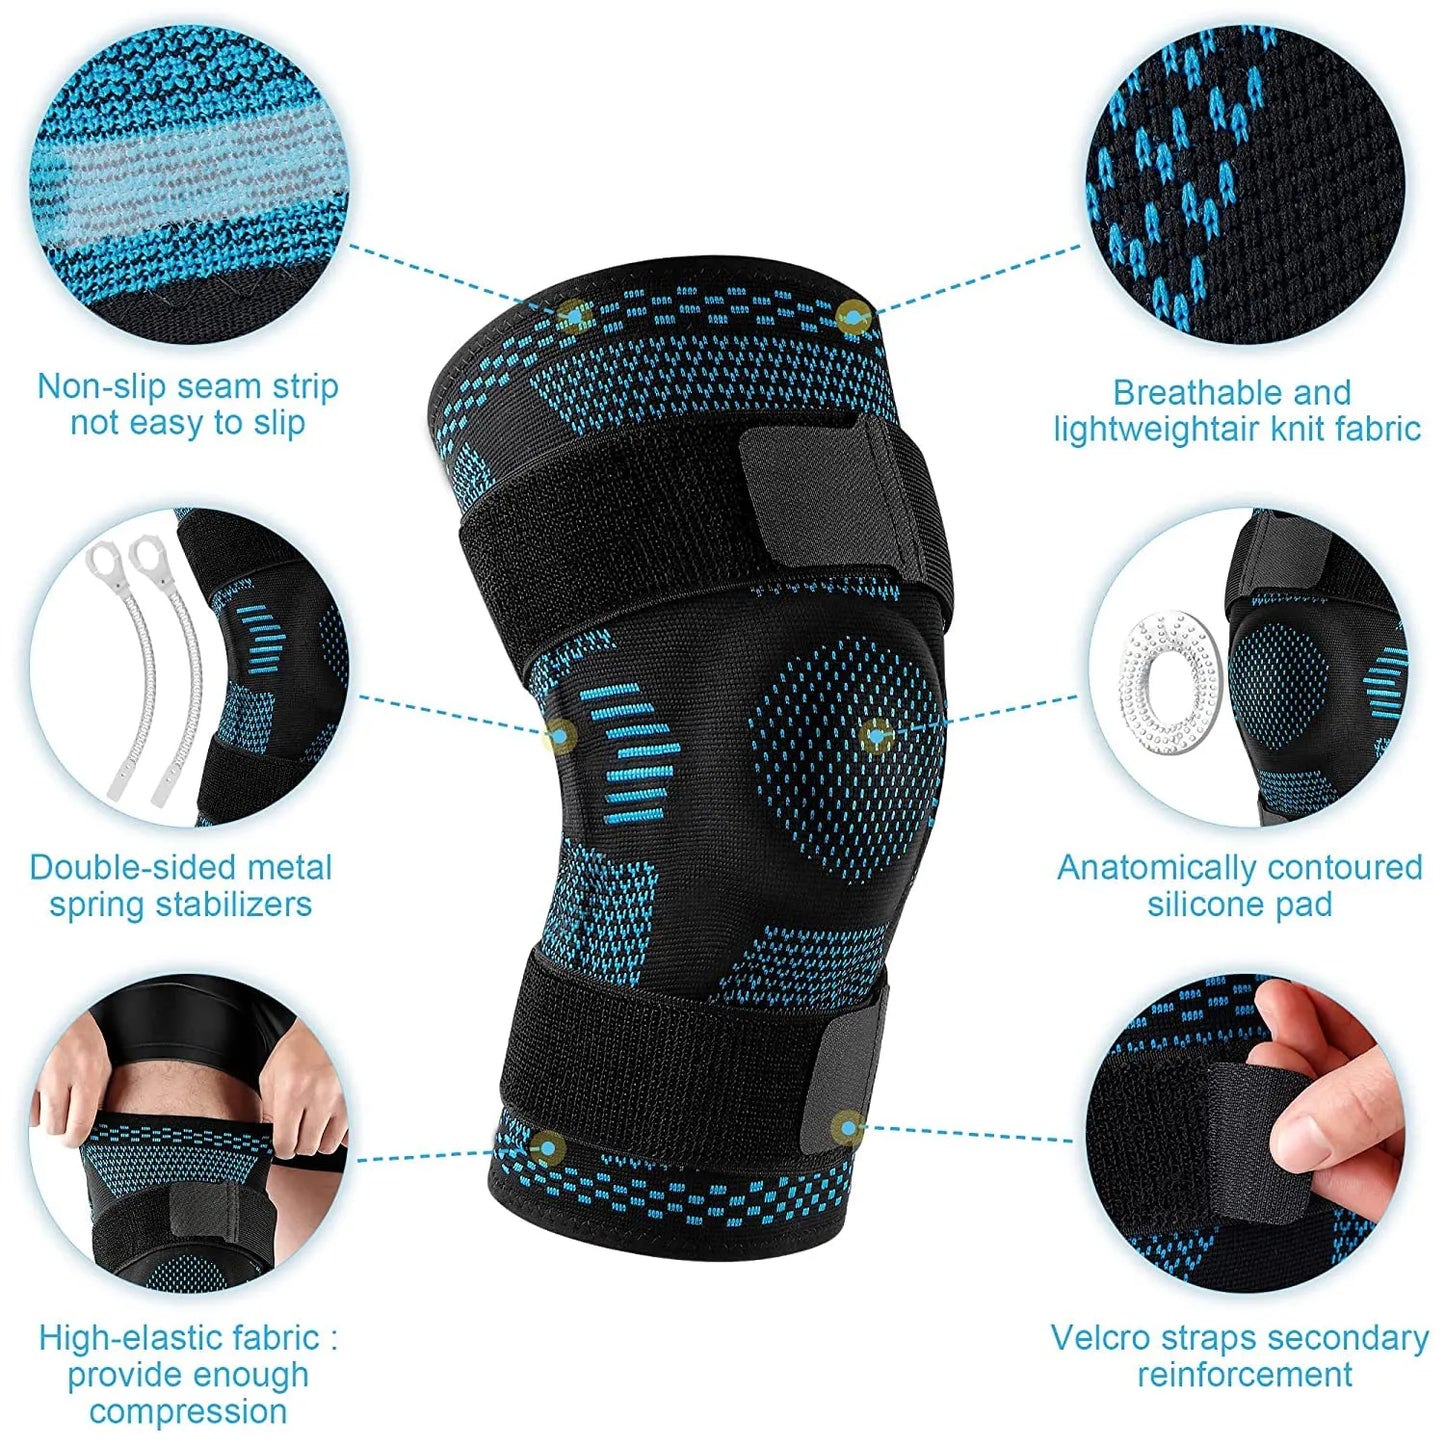 Sports Knee Pads Support